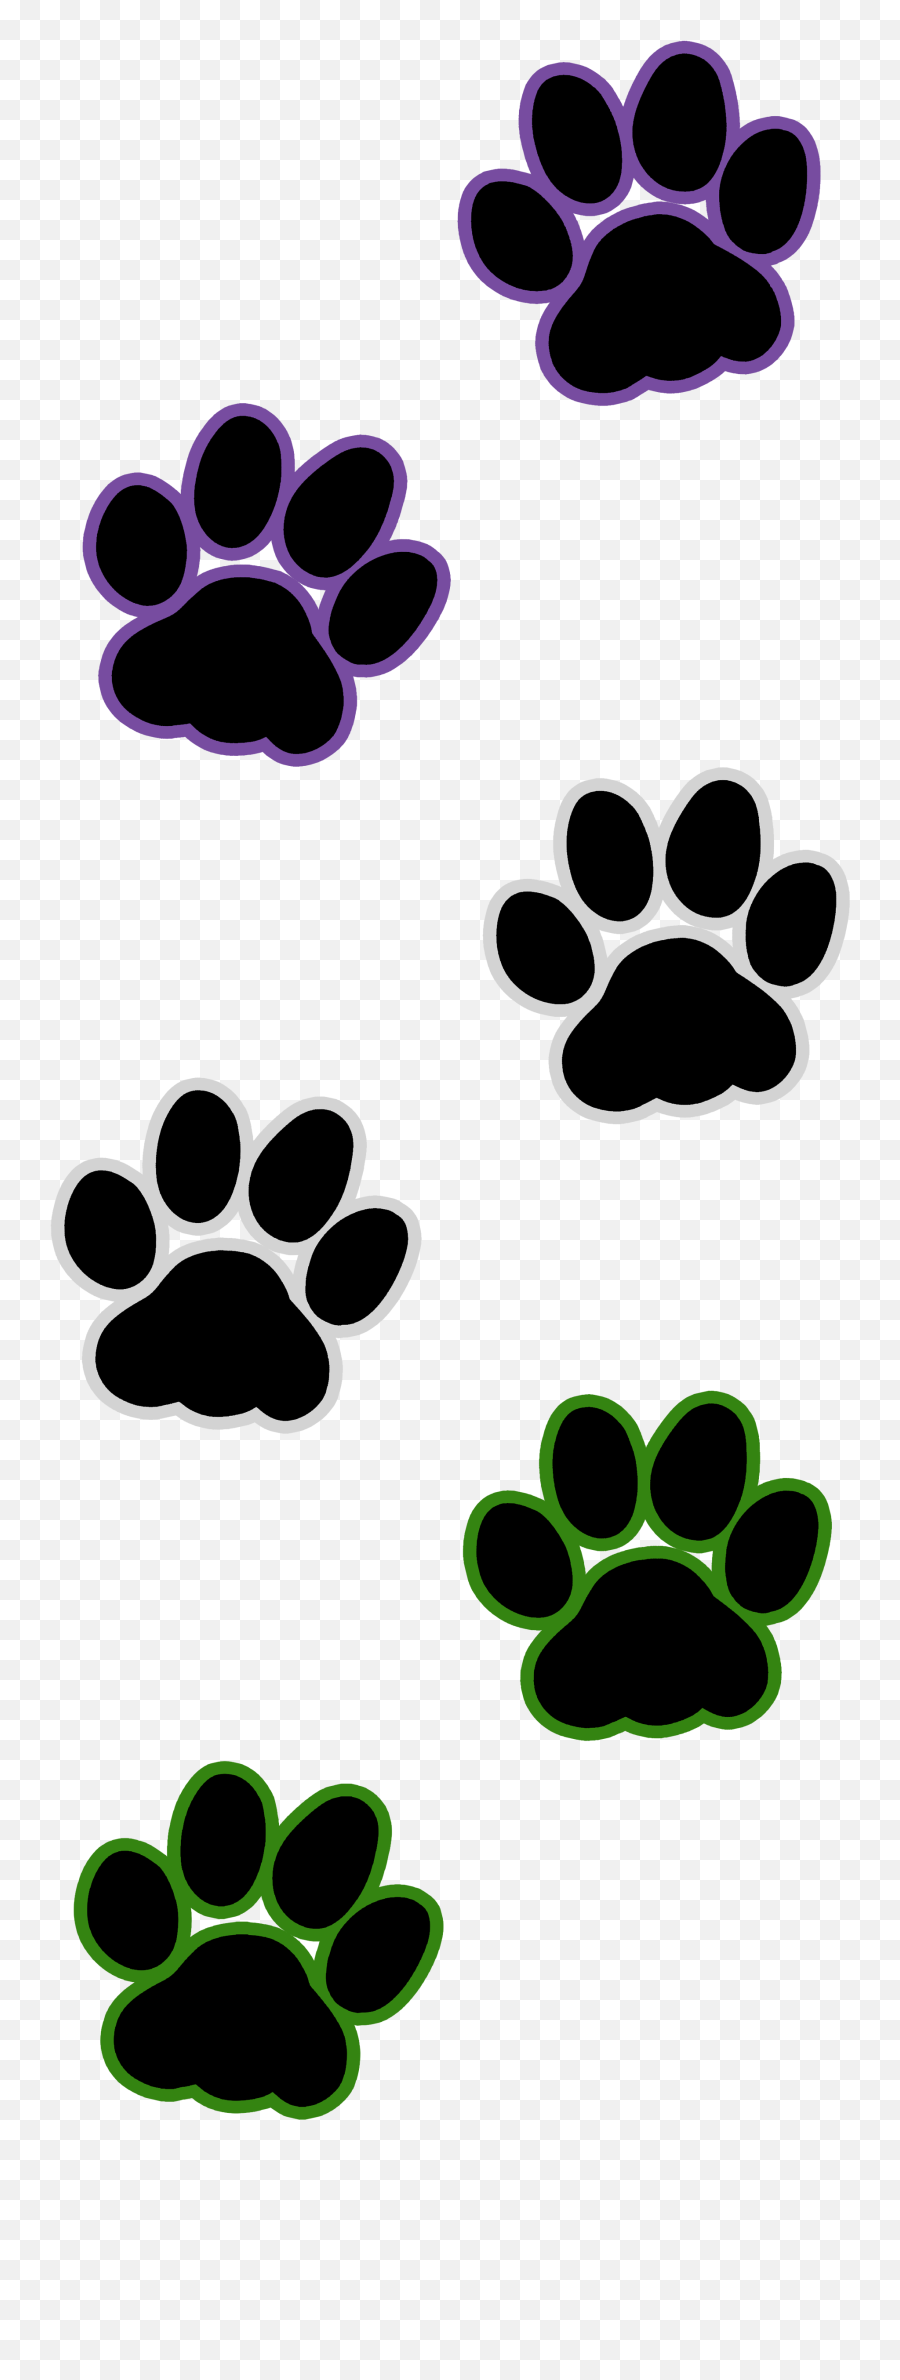 Library Of Cat Pawprint Graphic Black And White Library Png - Clip Art Emoji,Paw Print Clipart